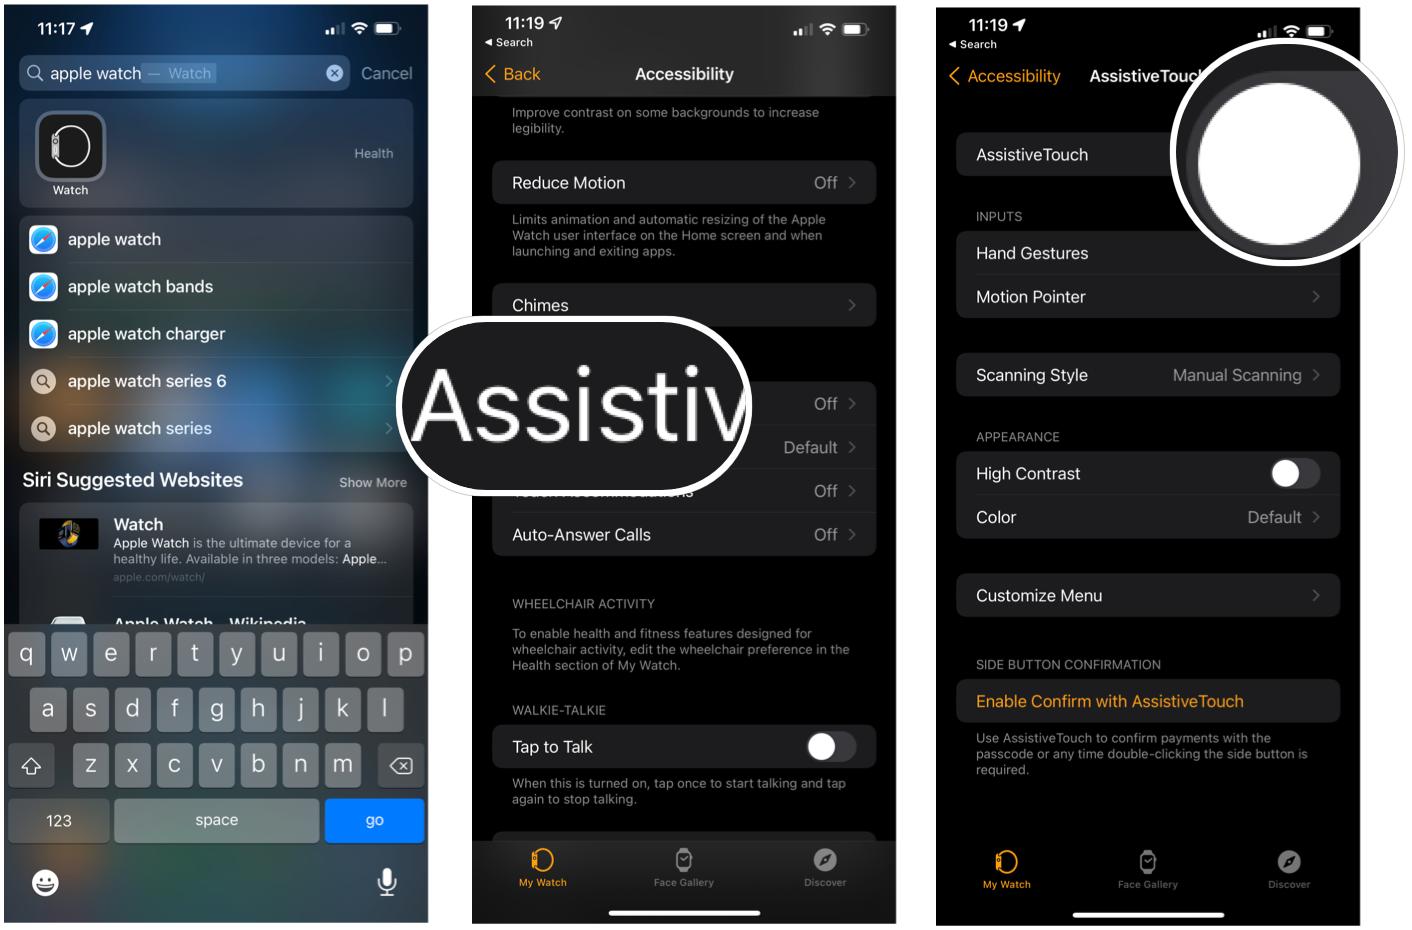 To set up AssistiveTouch on Apple Watch, tap on the Apple Watch app on your iPhone. Choose Accessibility, then AssistiveTouch. Toggle on AssistiveTouch.